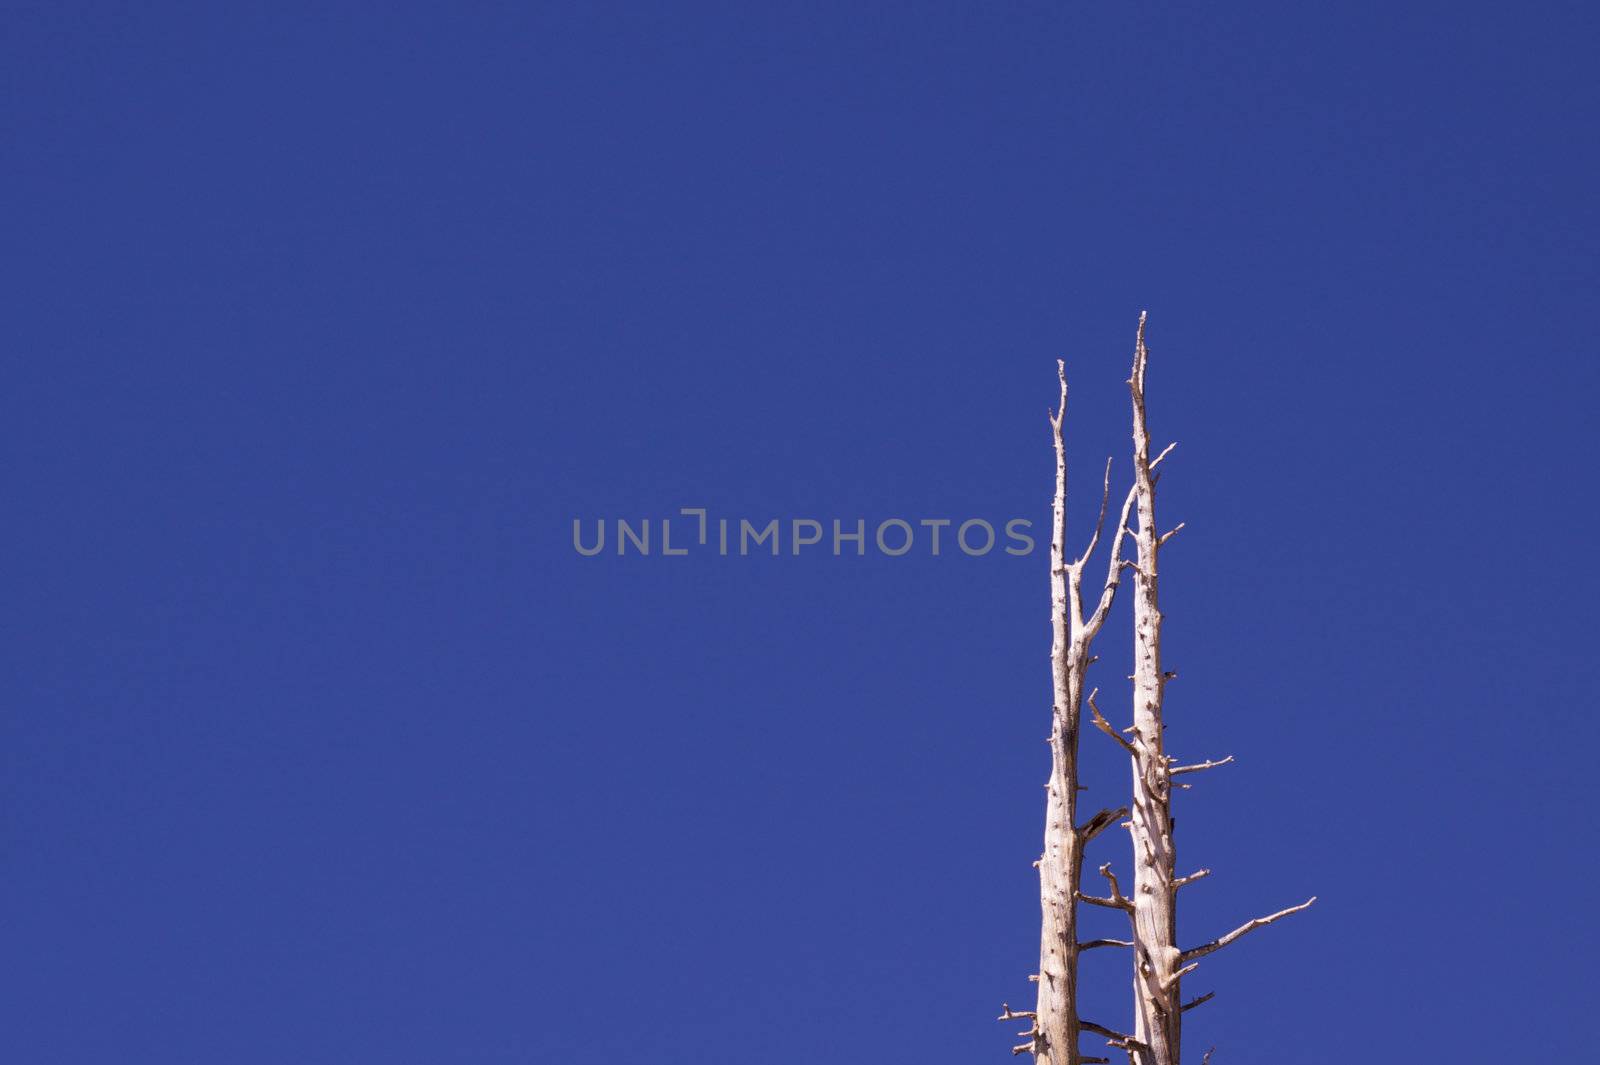 Two old pine trees agains a deep blue sky